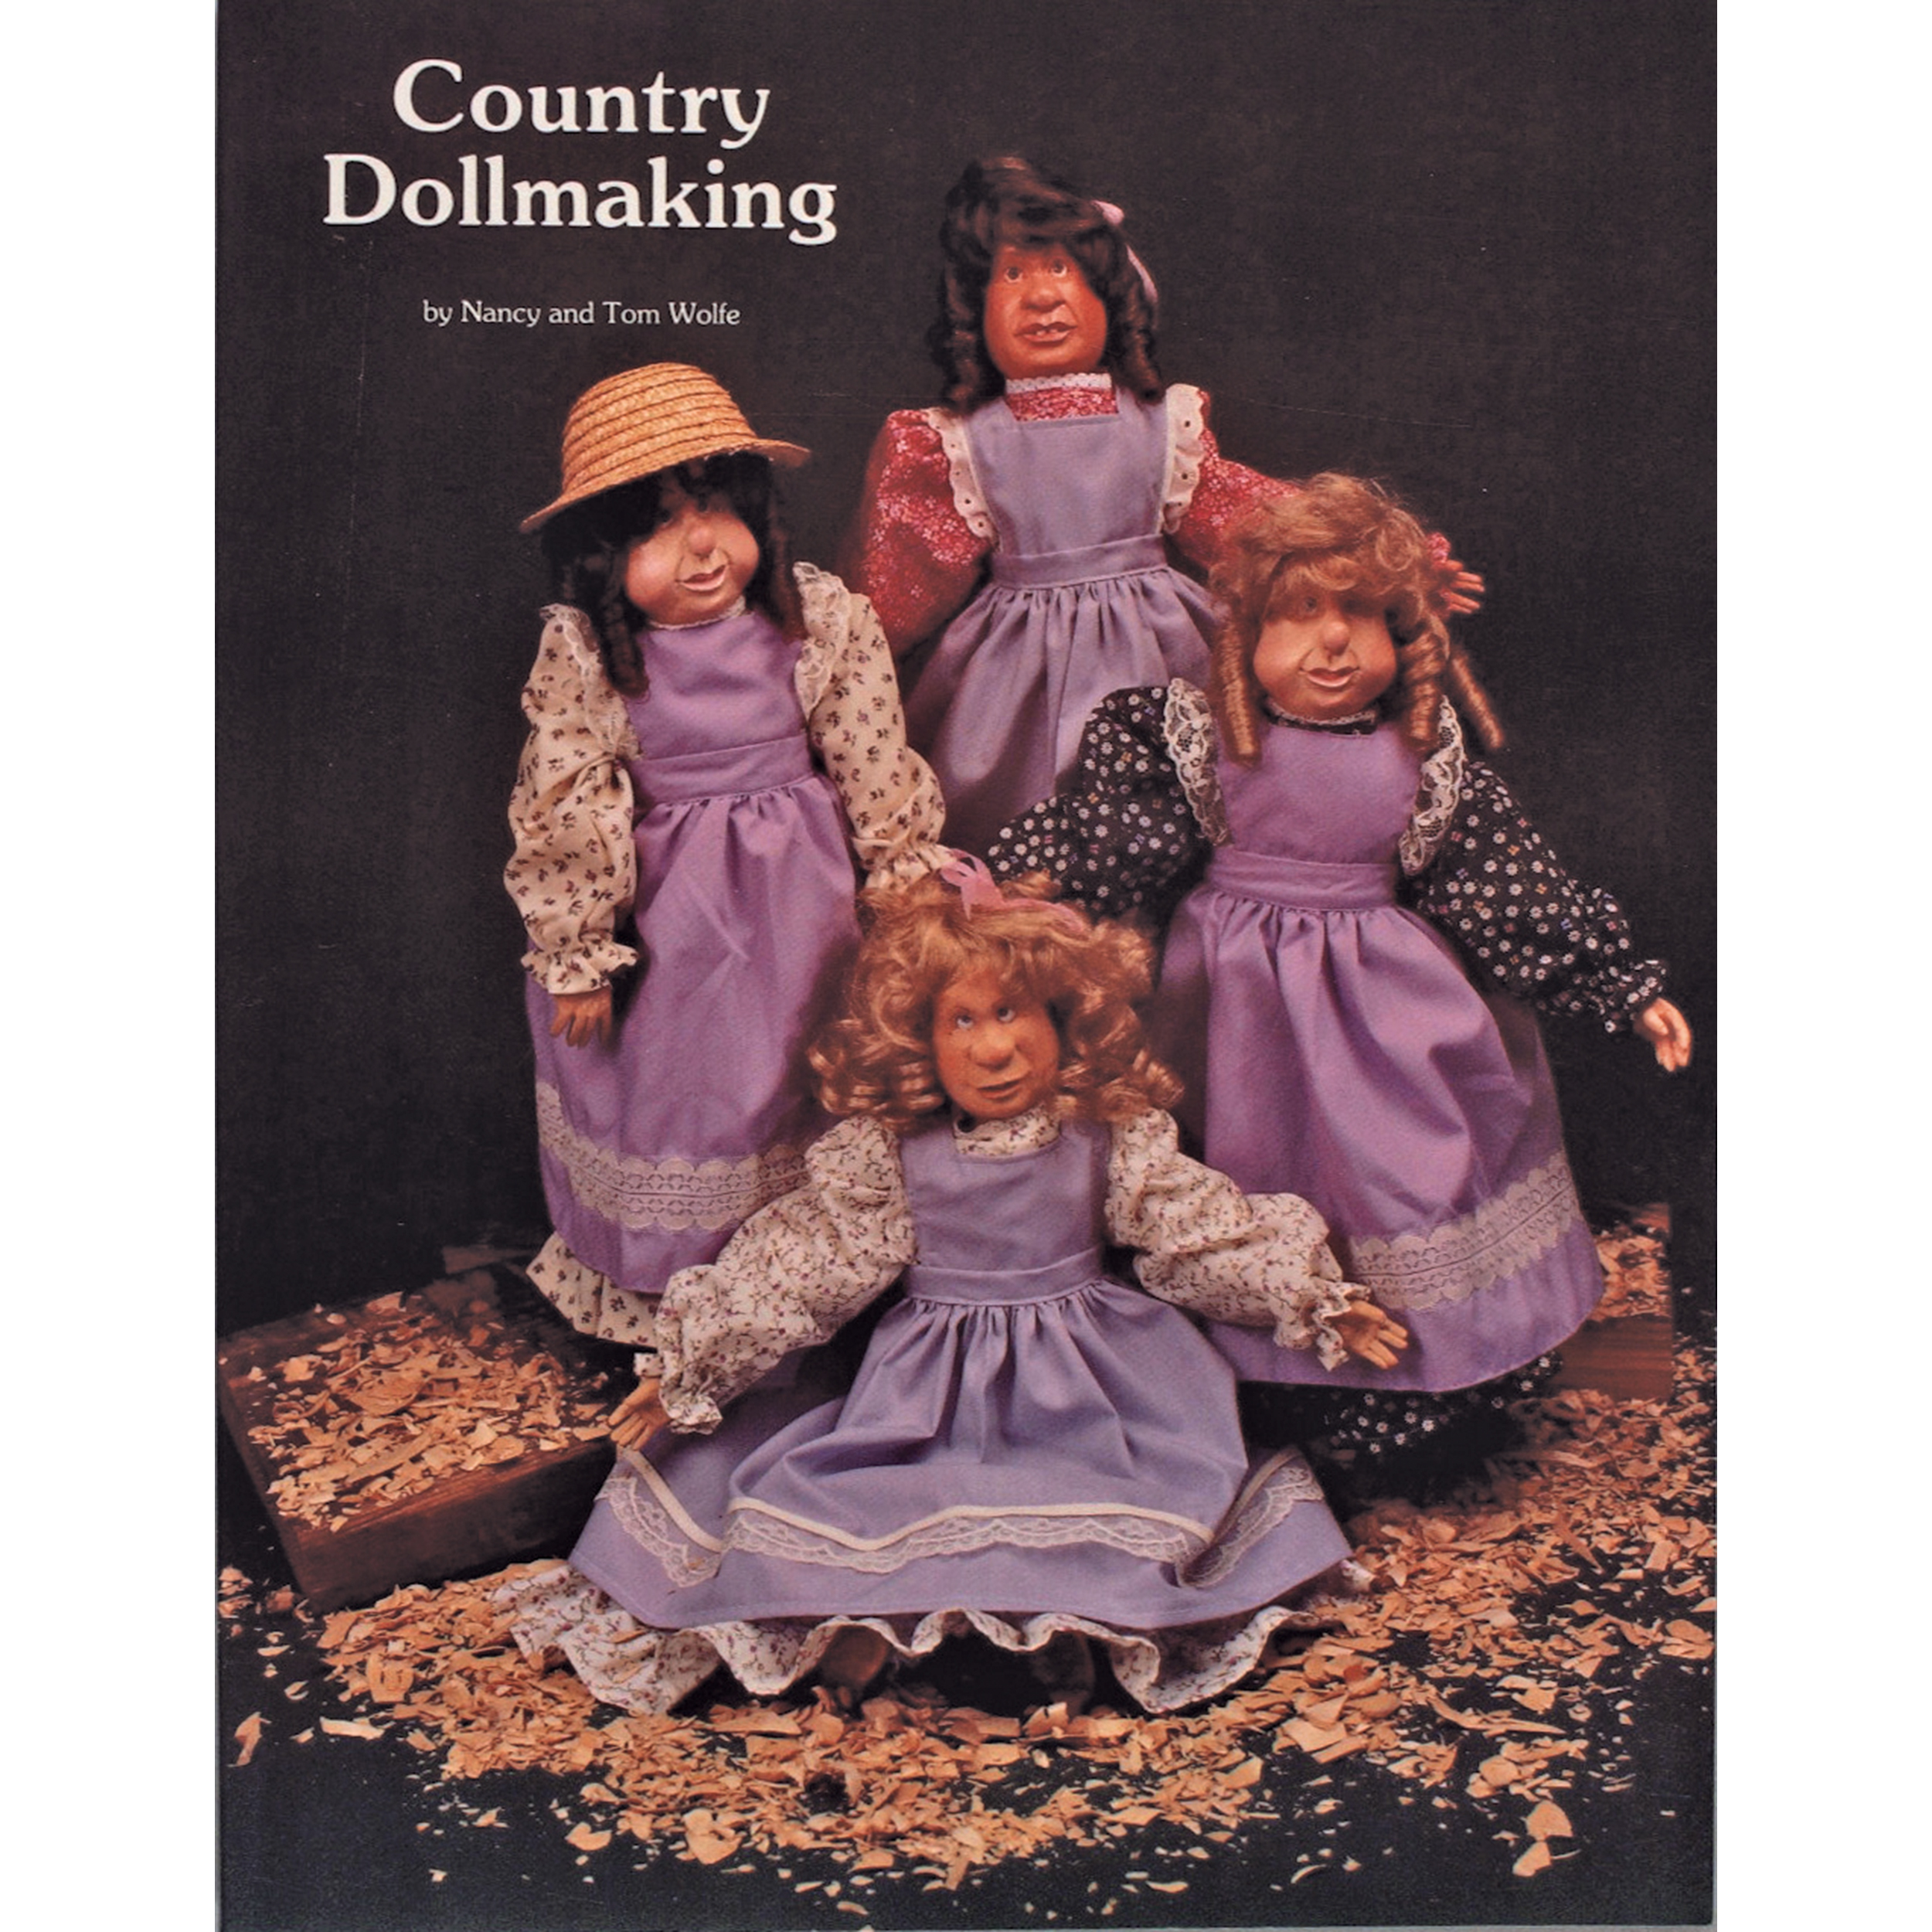 Country Dollmaking